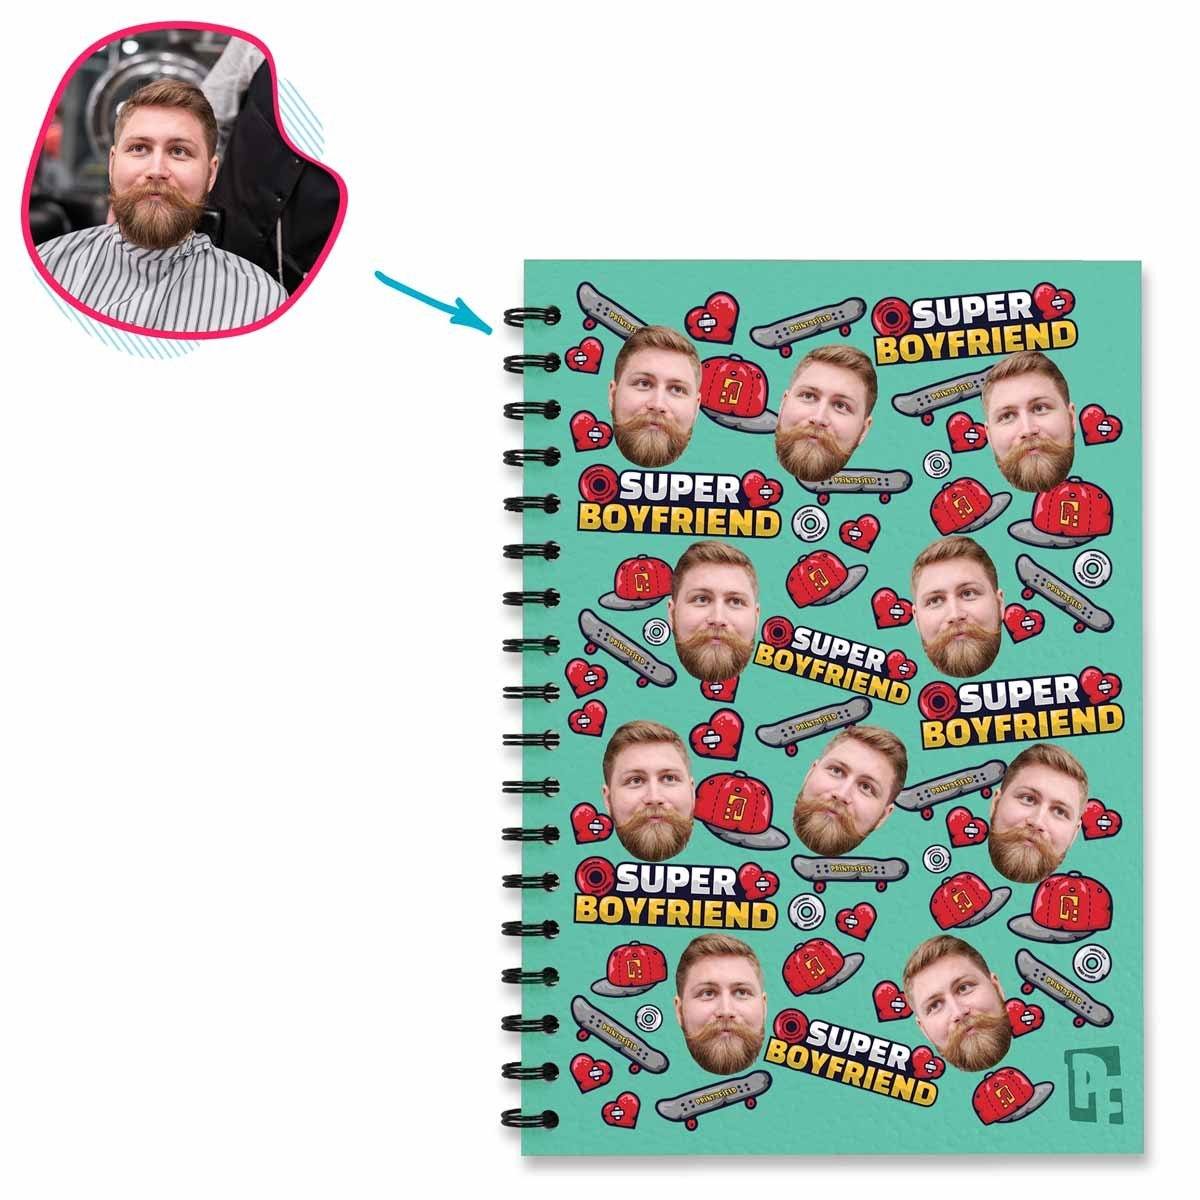 Mint Auntie personalized notebook with photo of face printed on them